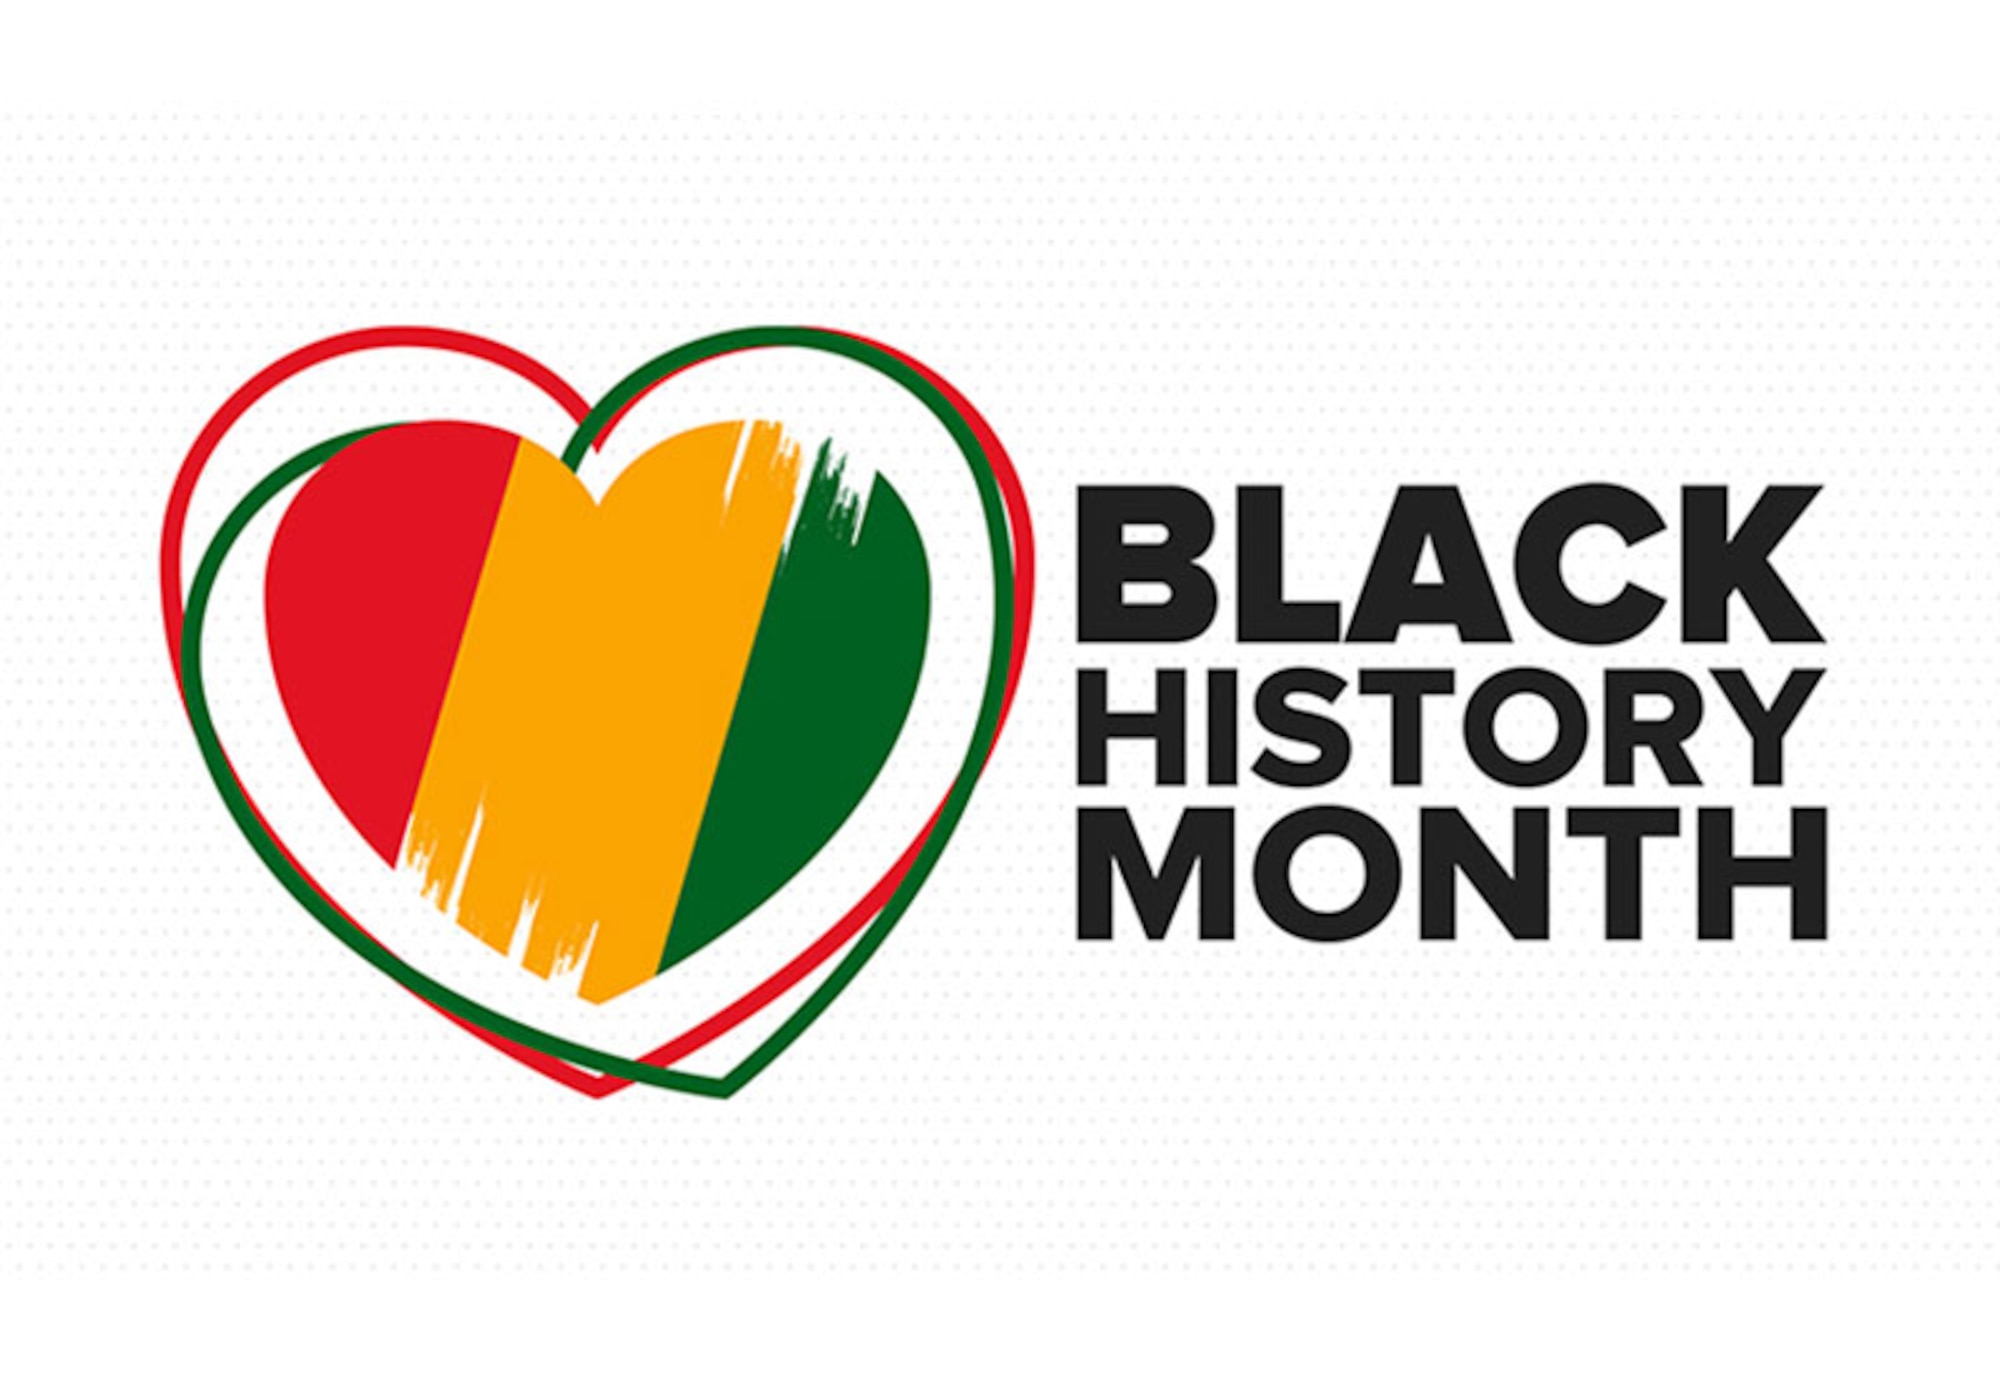 President Gerald Ford officially recognized Black History Month in 1976.